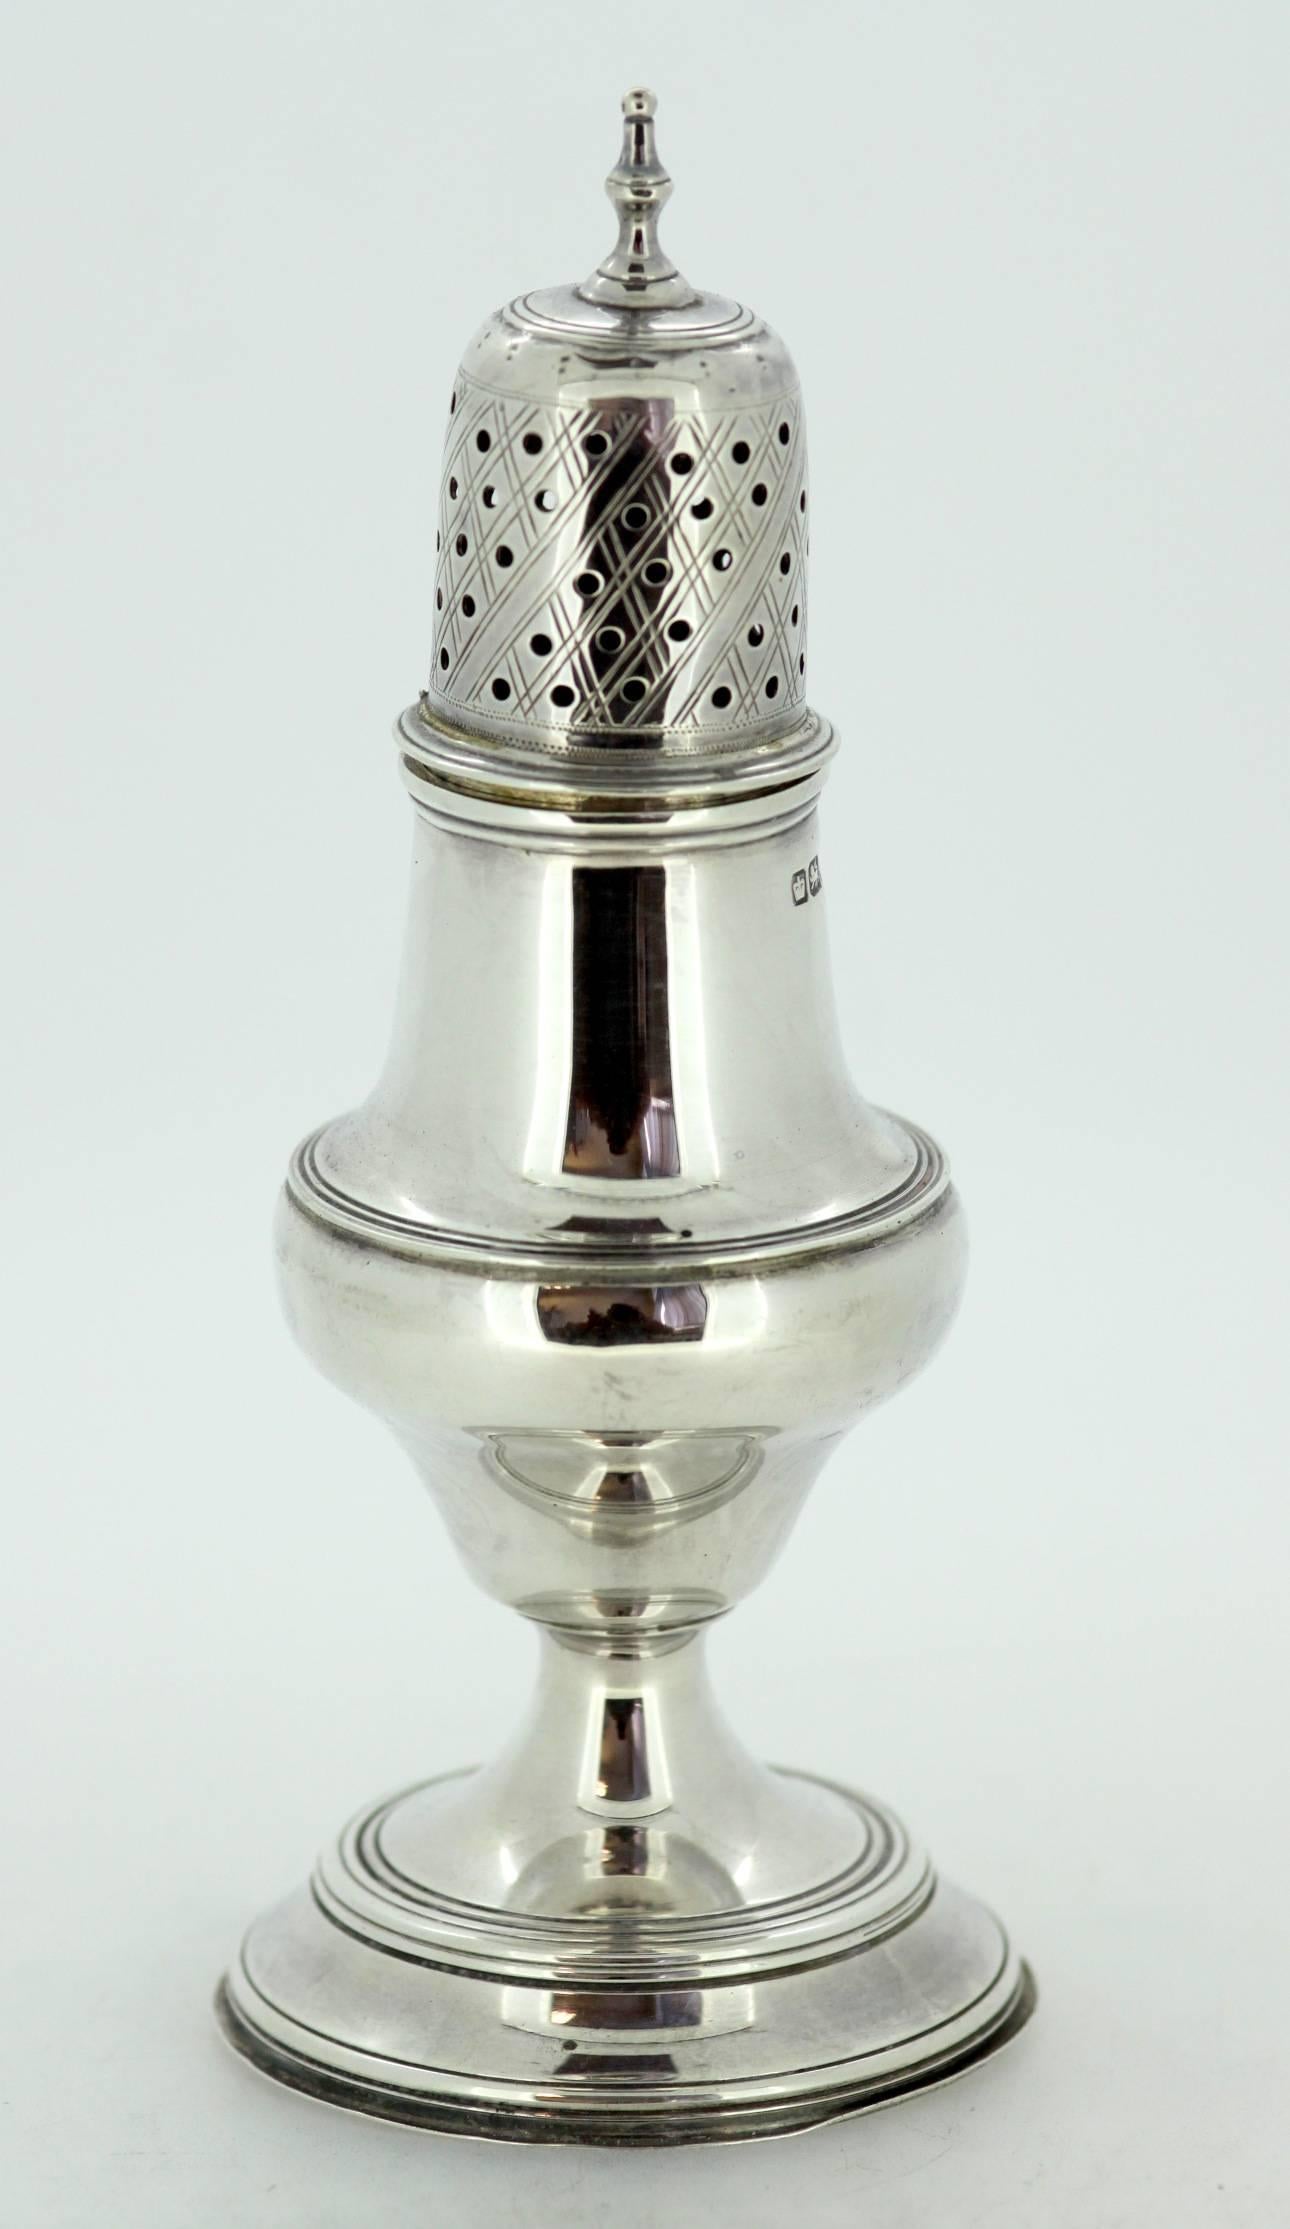 Solid sterling silver salt / pepper shaker 
Sheffield 1907 
Maker : Walker & Hall 
Fully hallmarked. 

Dimensions - 
Diameter x Height : 5.9 x 14 cm 
Weight : 85 grams 

Condition: Minor surface wear from general usage, overall excellent and